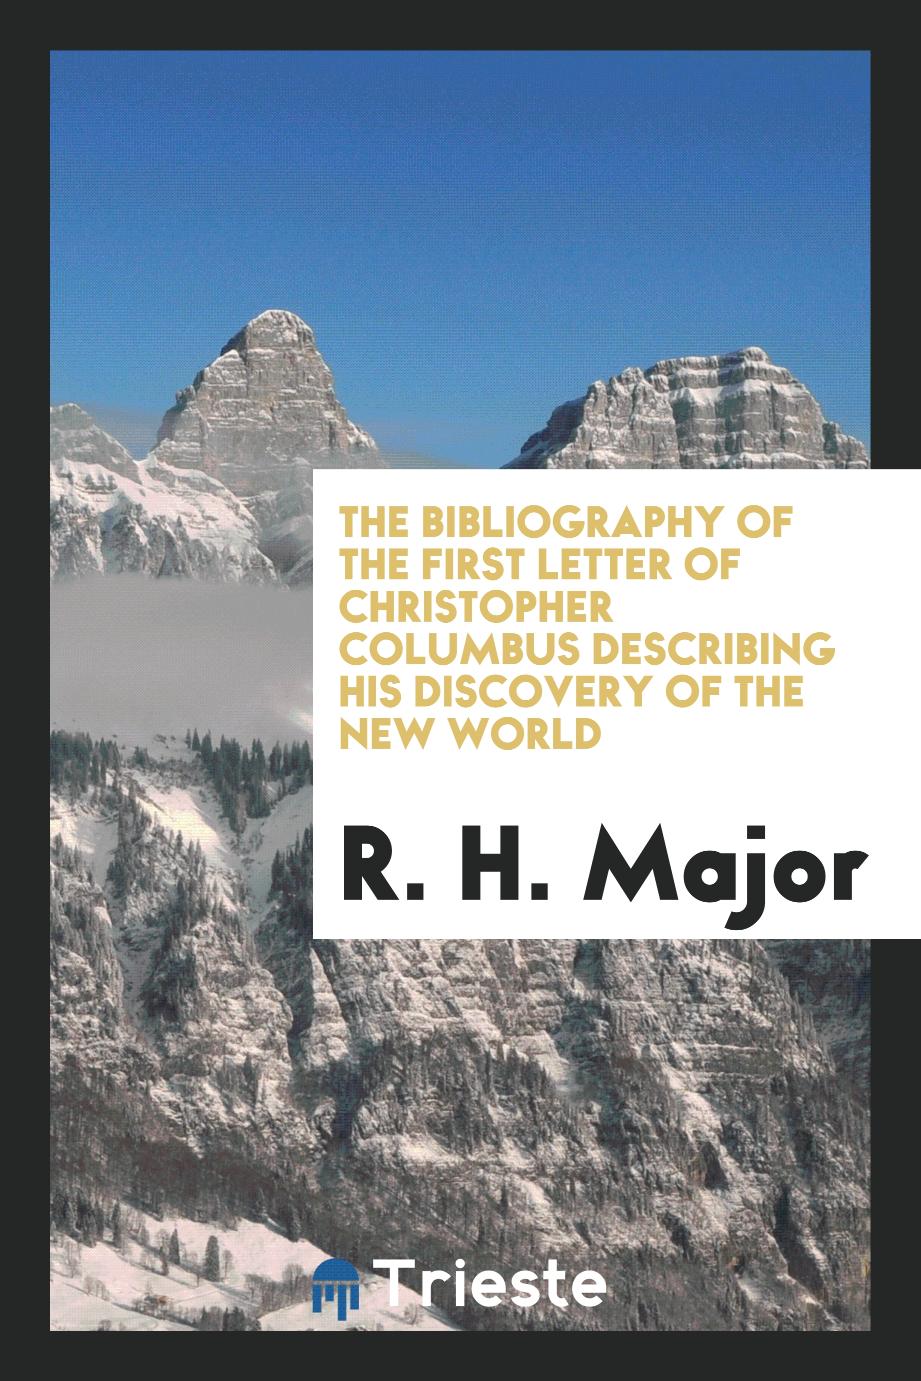 The bibliography of the first letter of Christopher Columbus describing his discovery of the New World